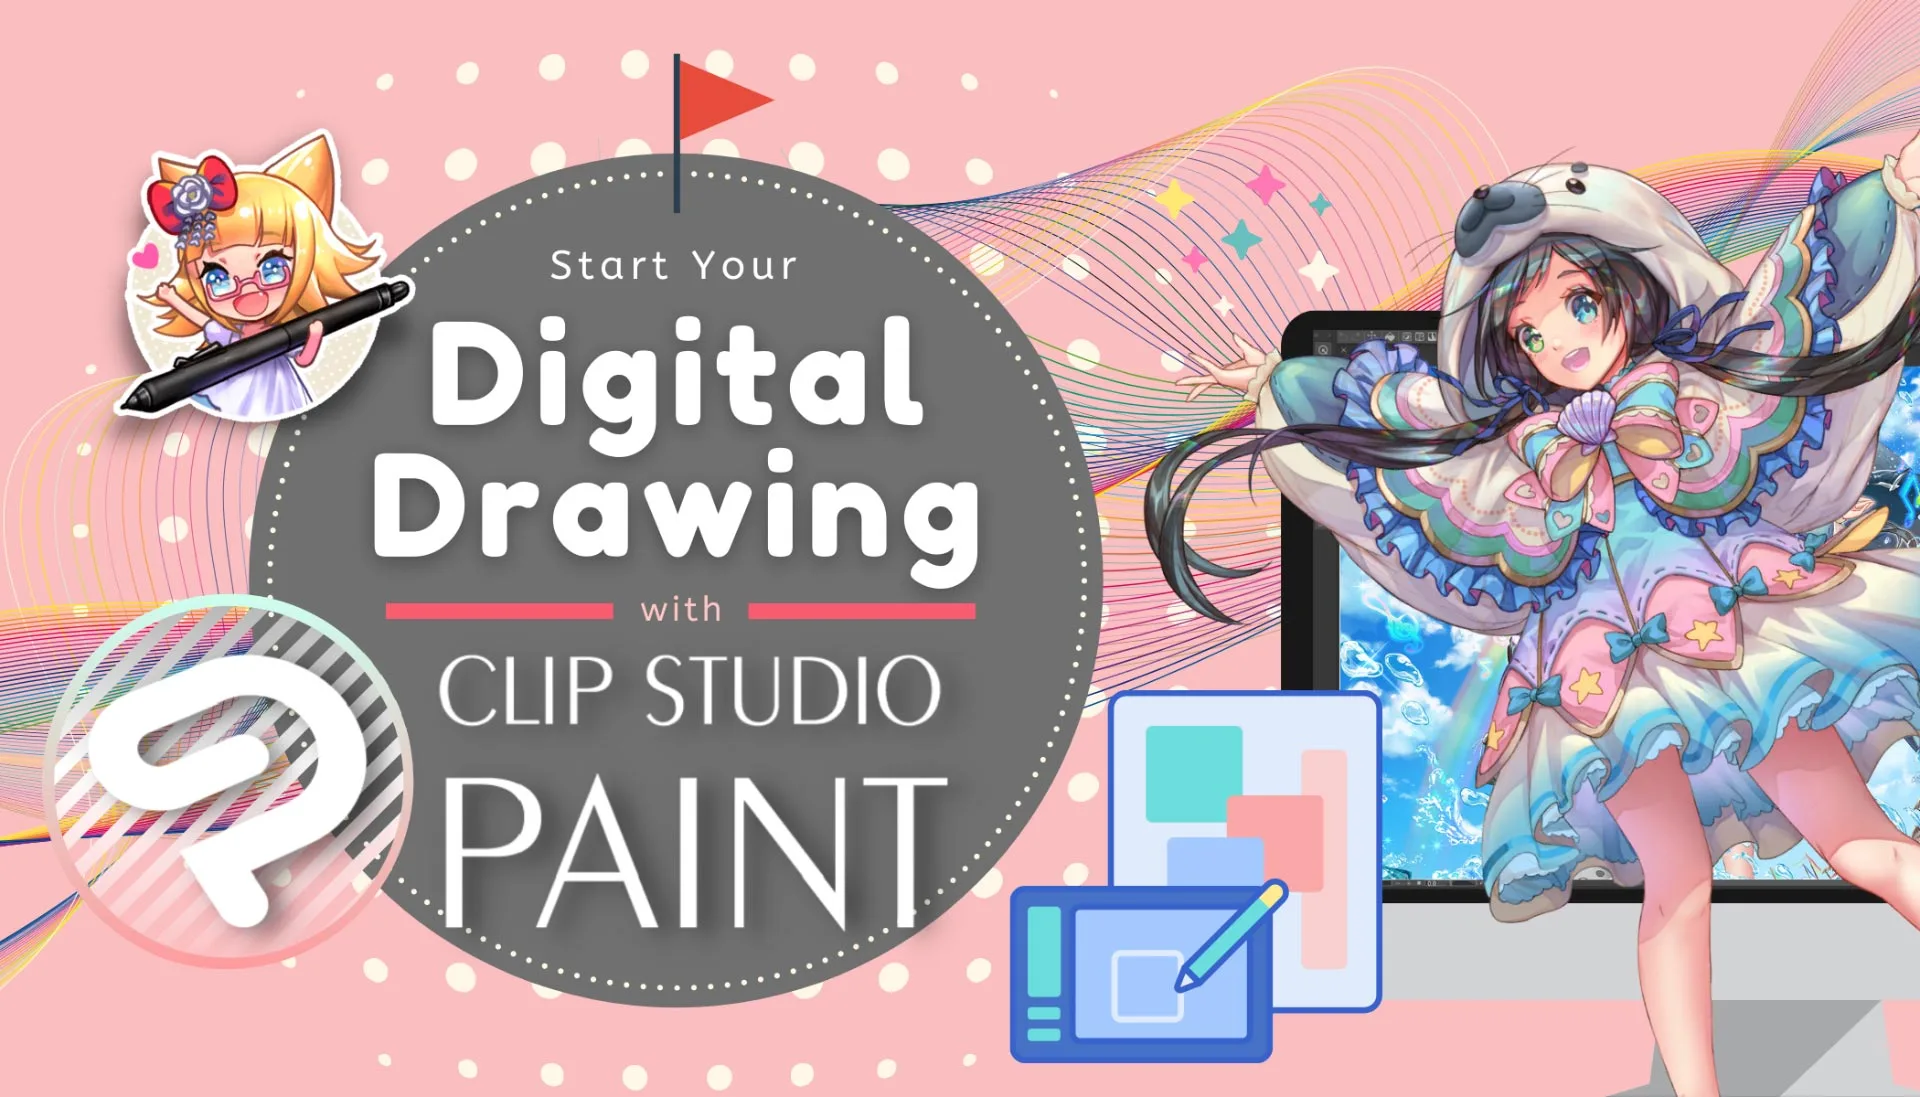 Start Your Digital Drawing With CLIP STUDIO PAINT